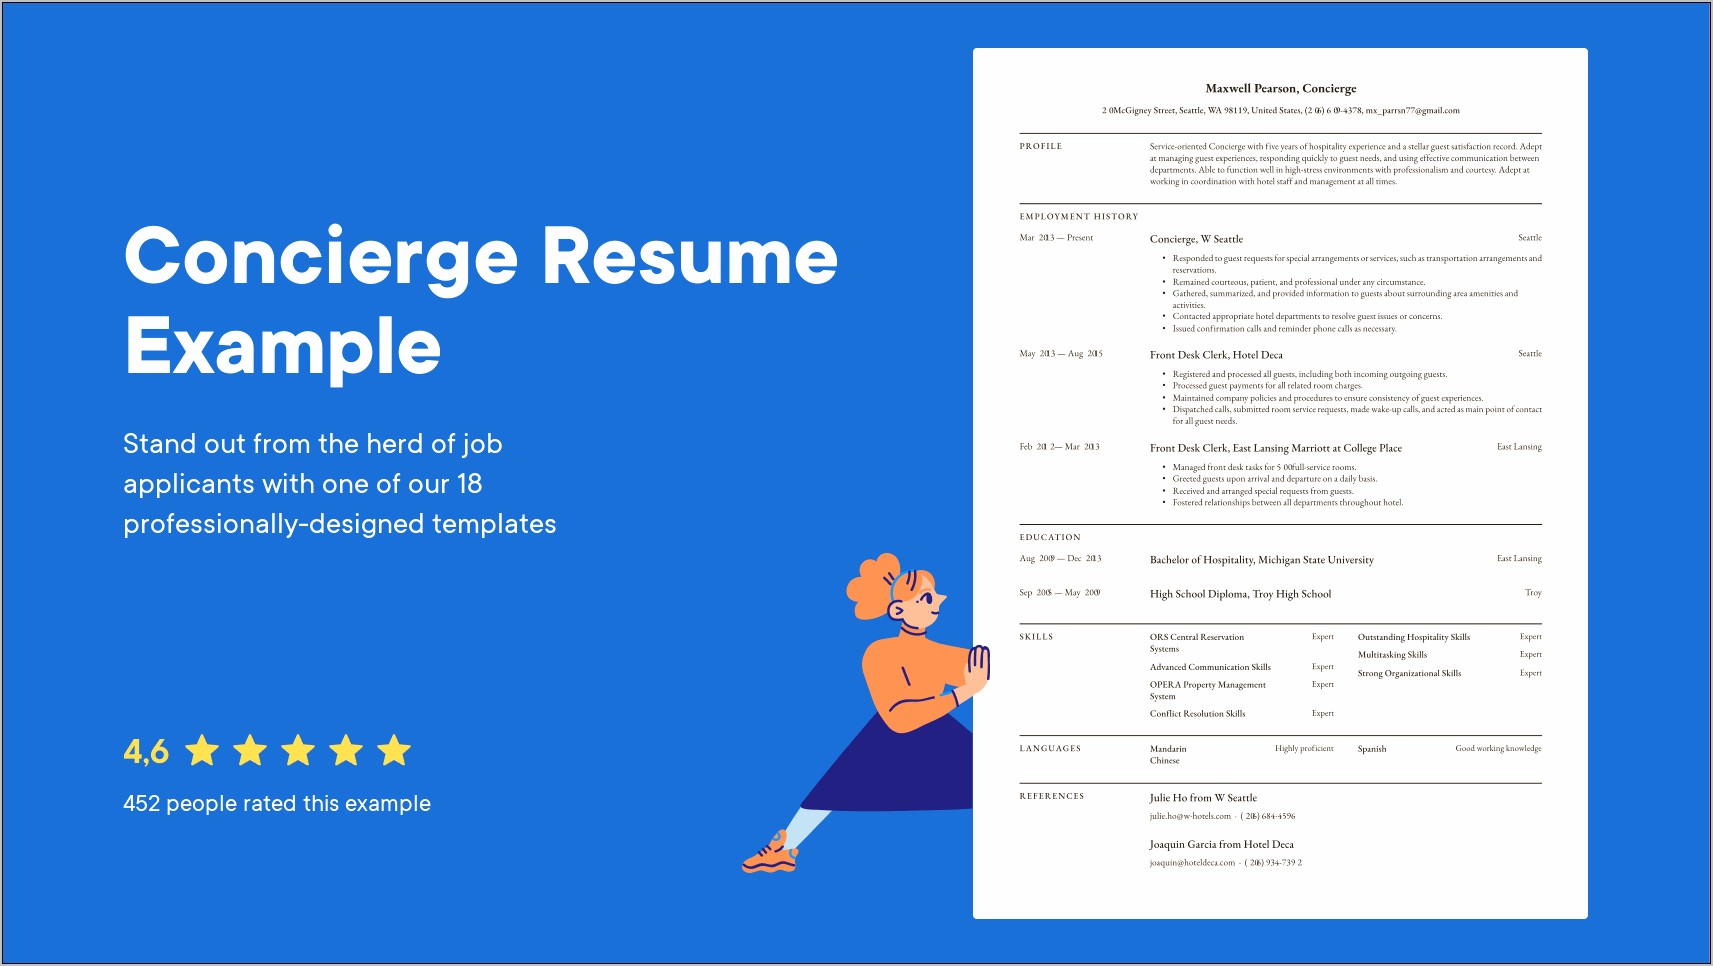 Examples Of Good Concierge Resumes